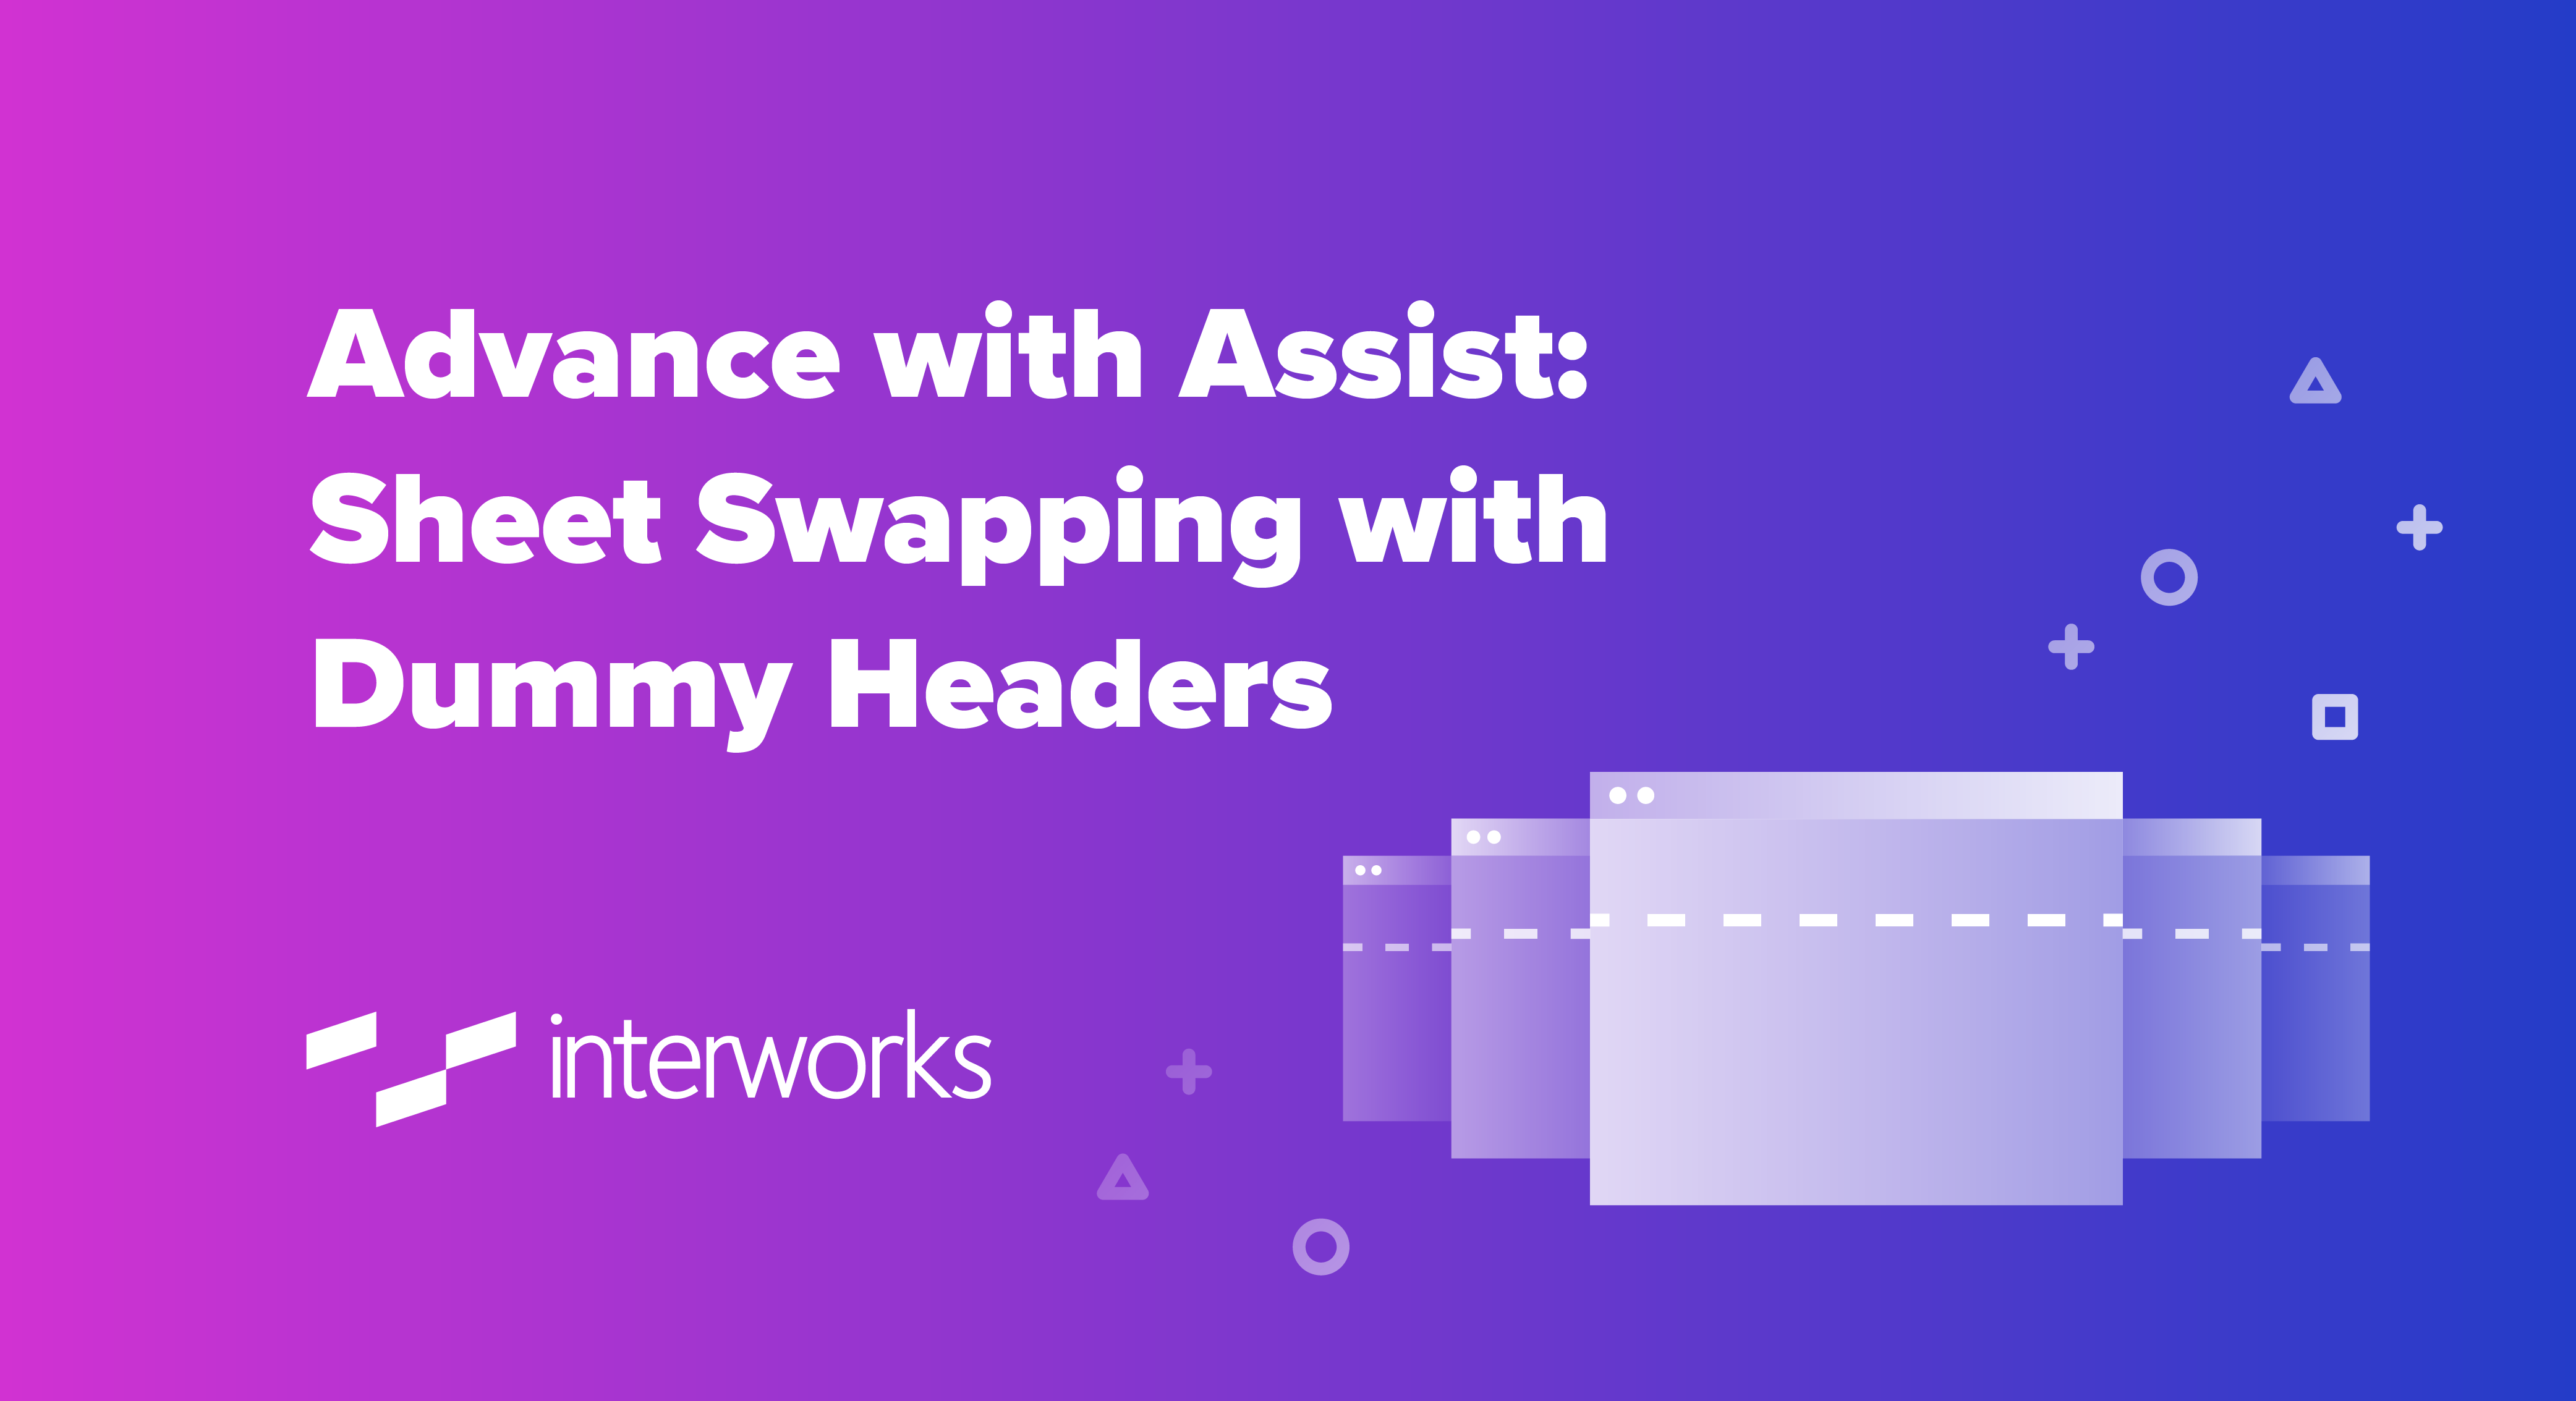 Advance with Assist: Sheet Swapping with Dummy Headers